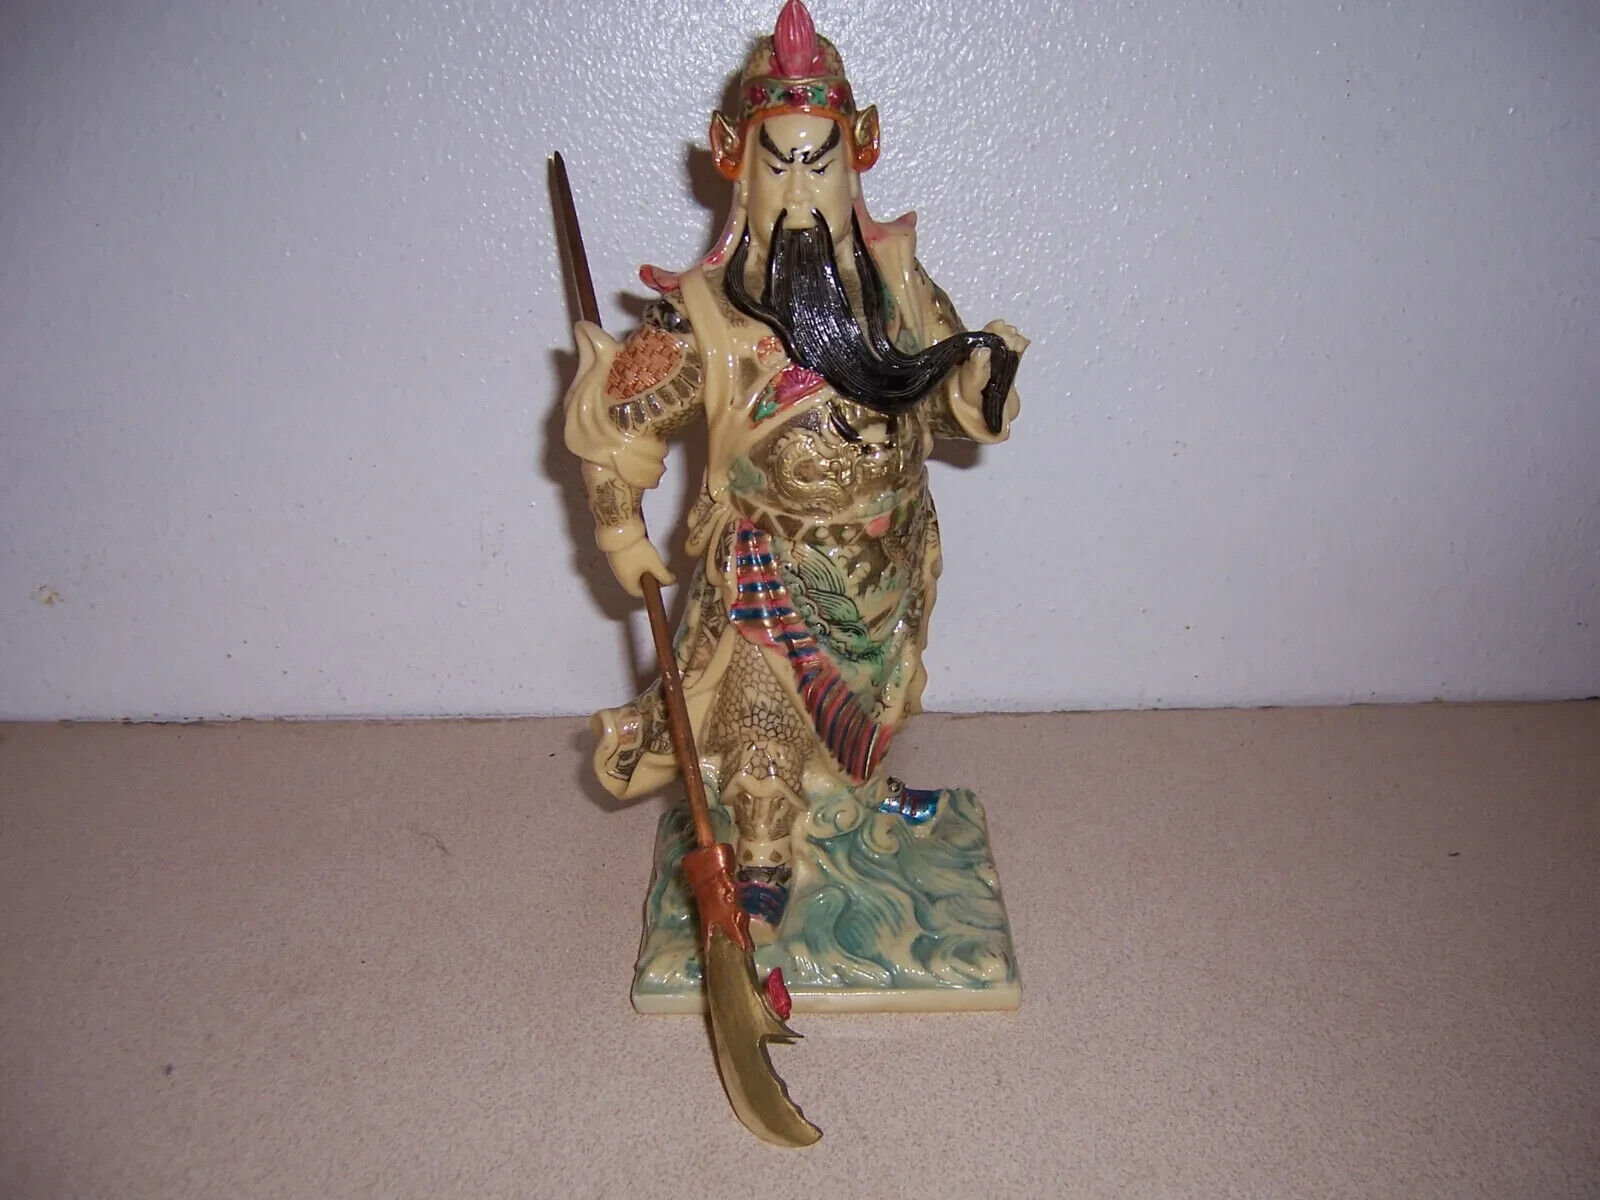 Vintage Chinese Warrior Statue - High Quality Handpainted Resin